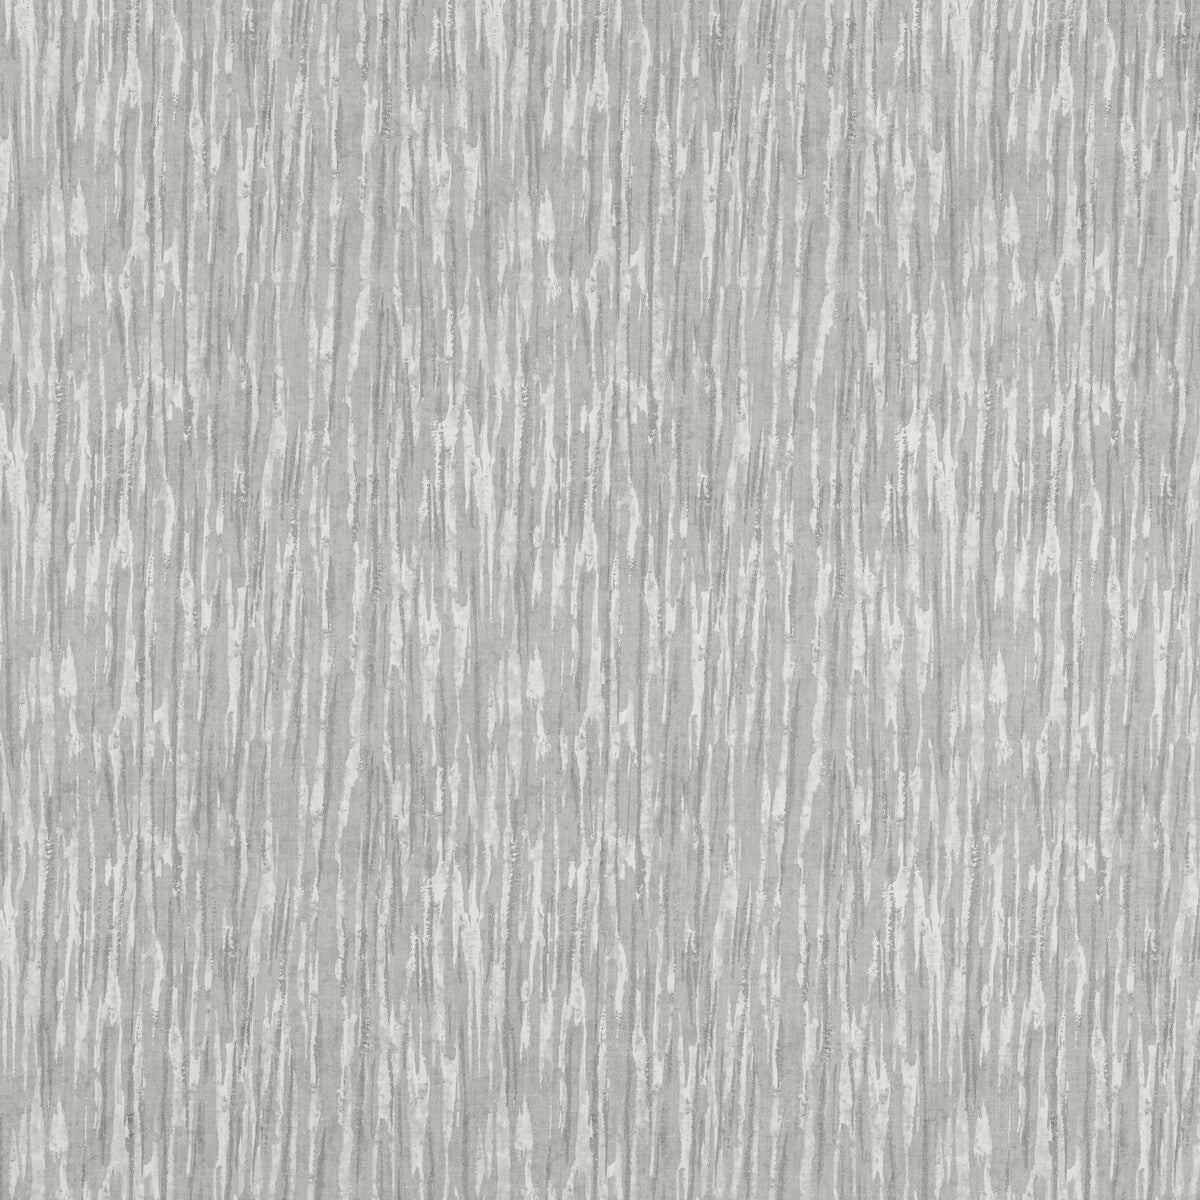 Senko fabric in storm color - pattern SENKO.11.0 - by Kravet Basics in the Monterey collection